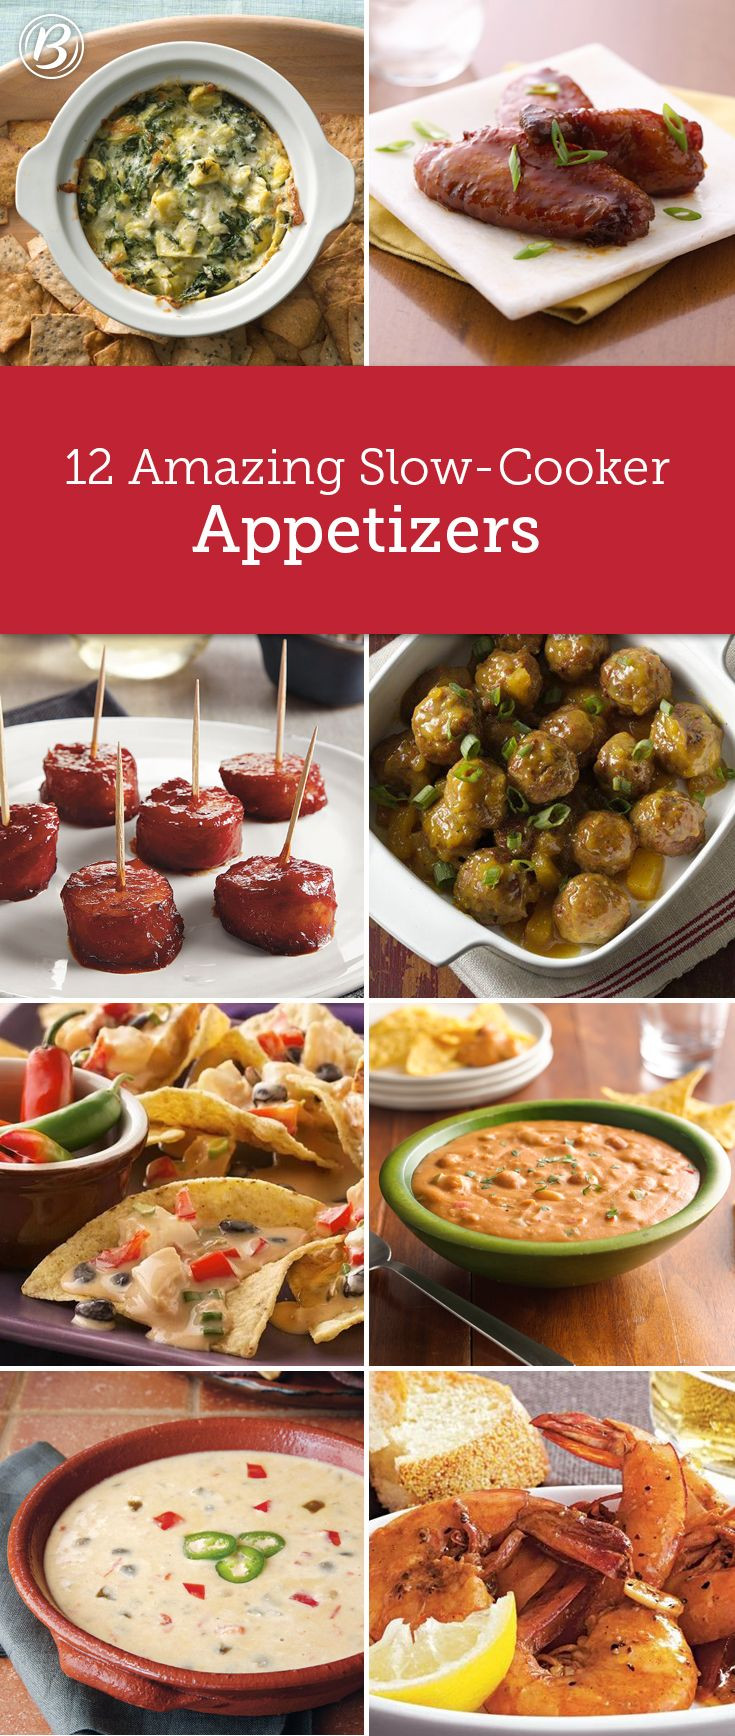 Slow Cooker Appetizers For Party
 Slow Cooker Apps That Are Ready to Party